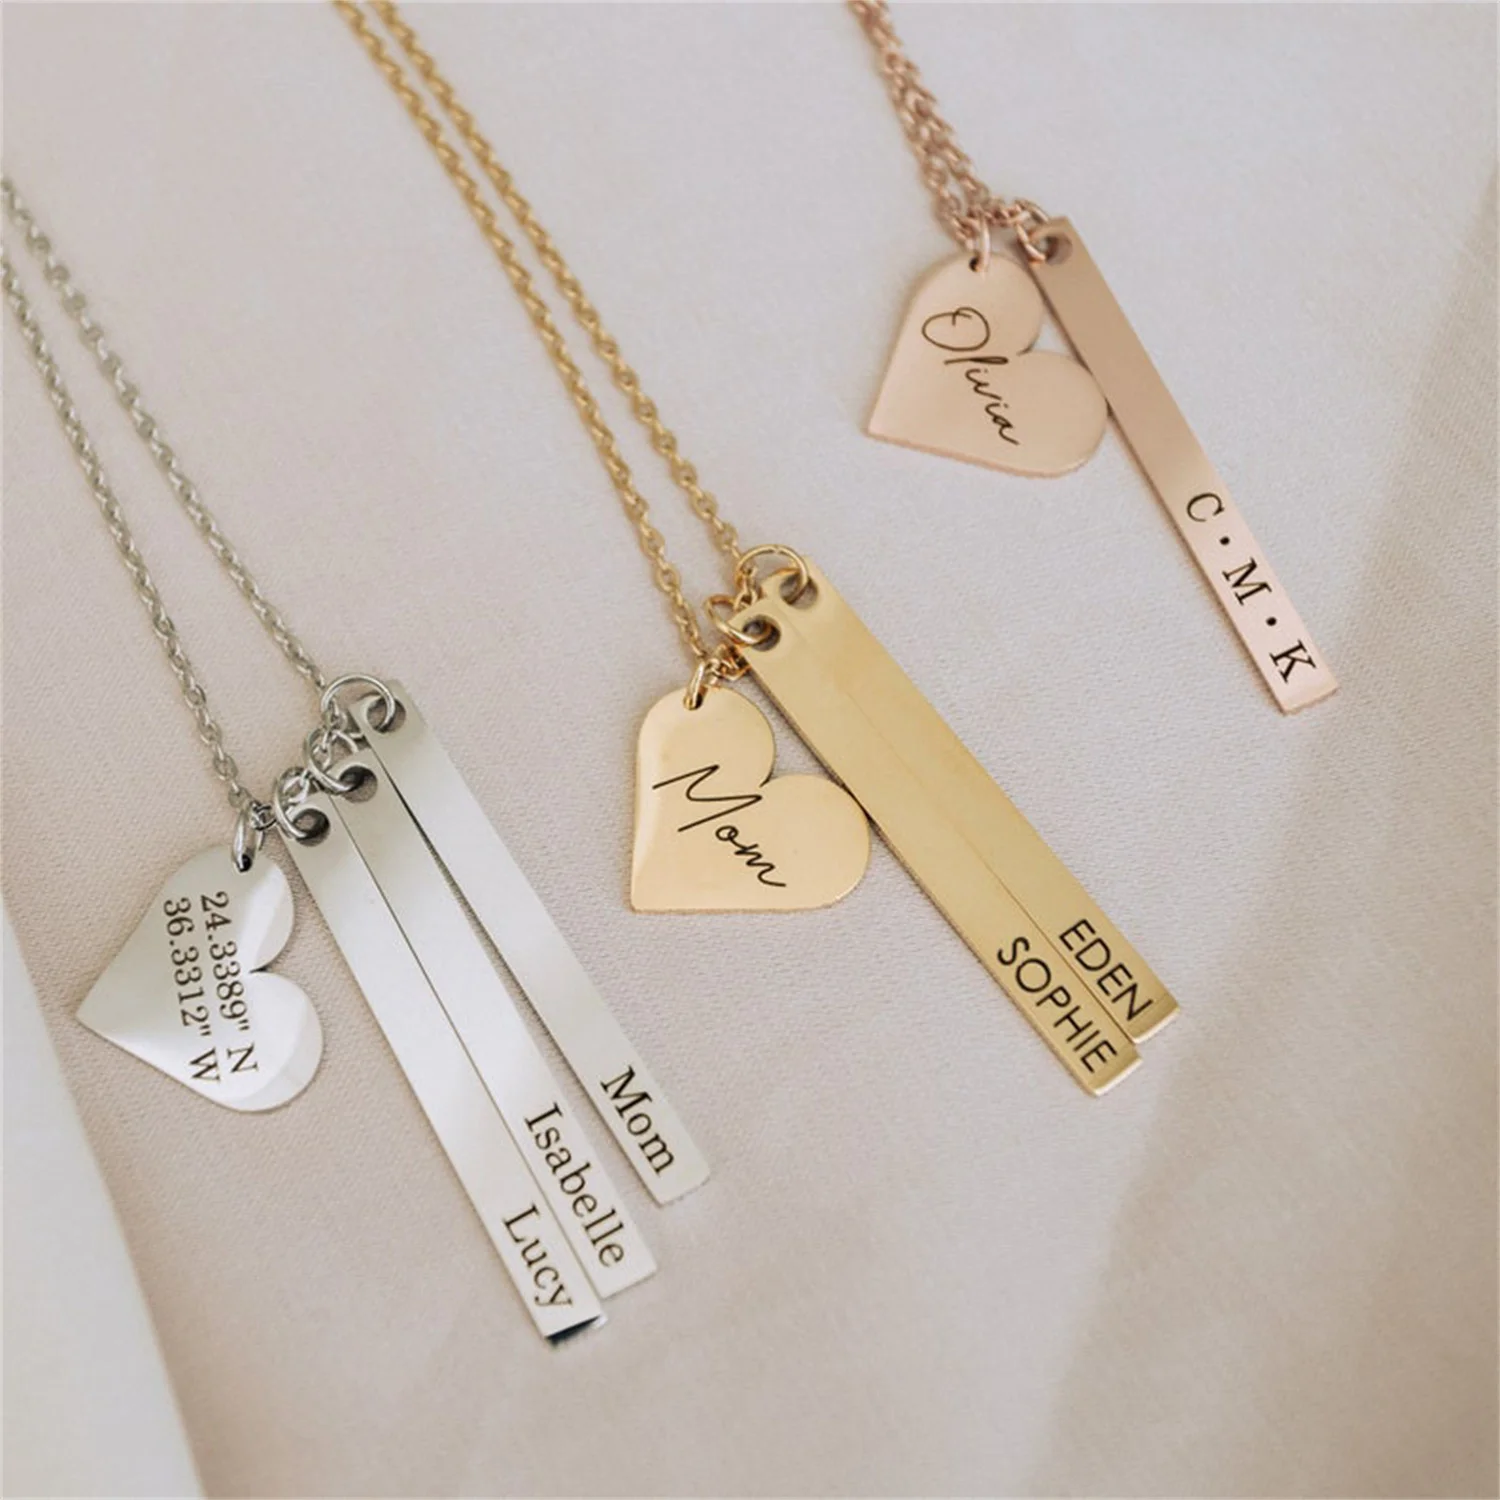 Personalized Engraved Name Bar Necklace Custom Heart Gold Charm Pendant Stainless Steel Jewelry Exquisite Gift For Family Friend e0bf 1 2pcs couple necklace bracelet relationship matching taichi fish bracelet for women teen best friend family jewelry